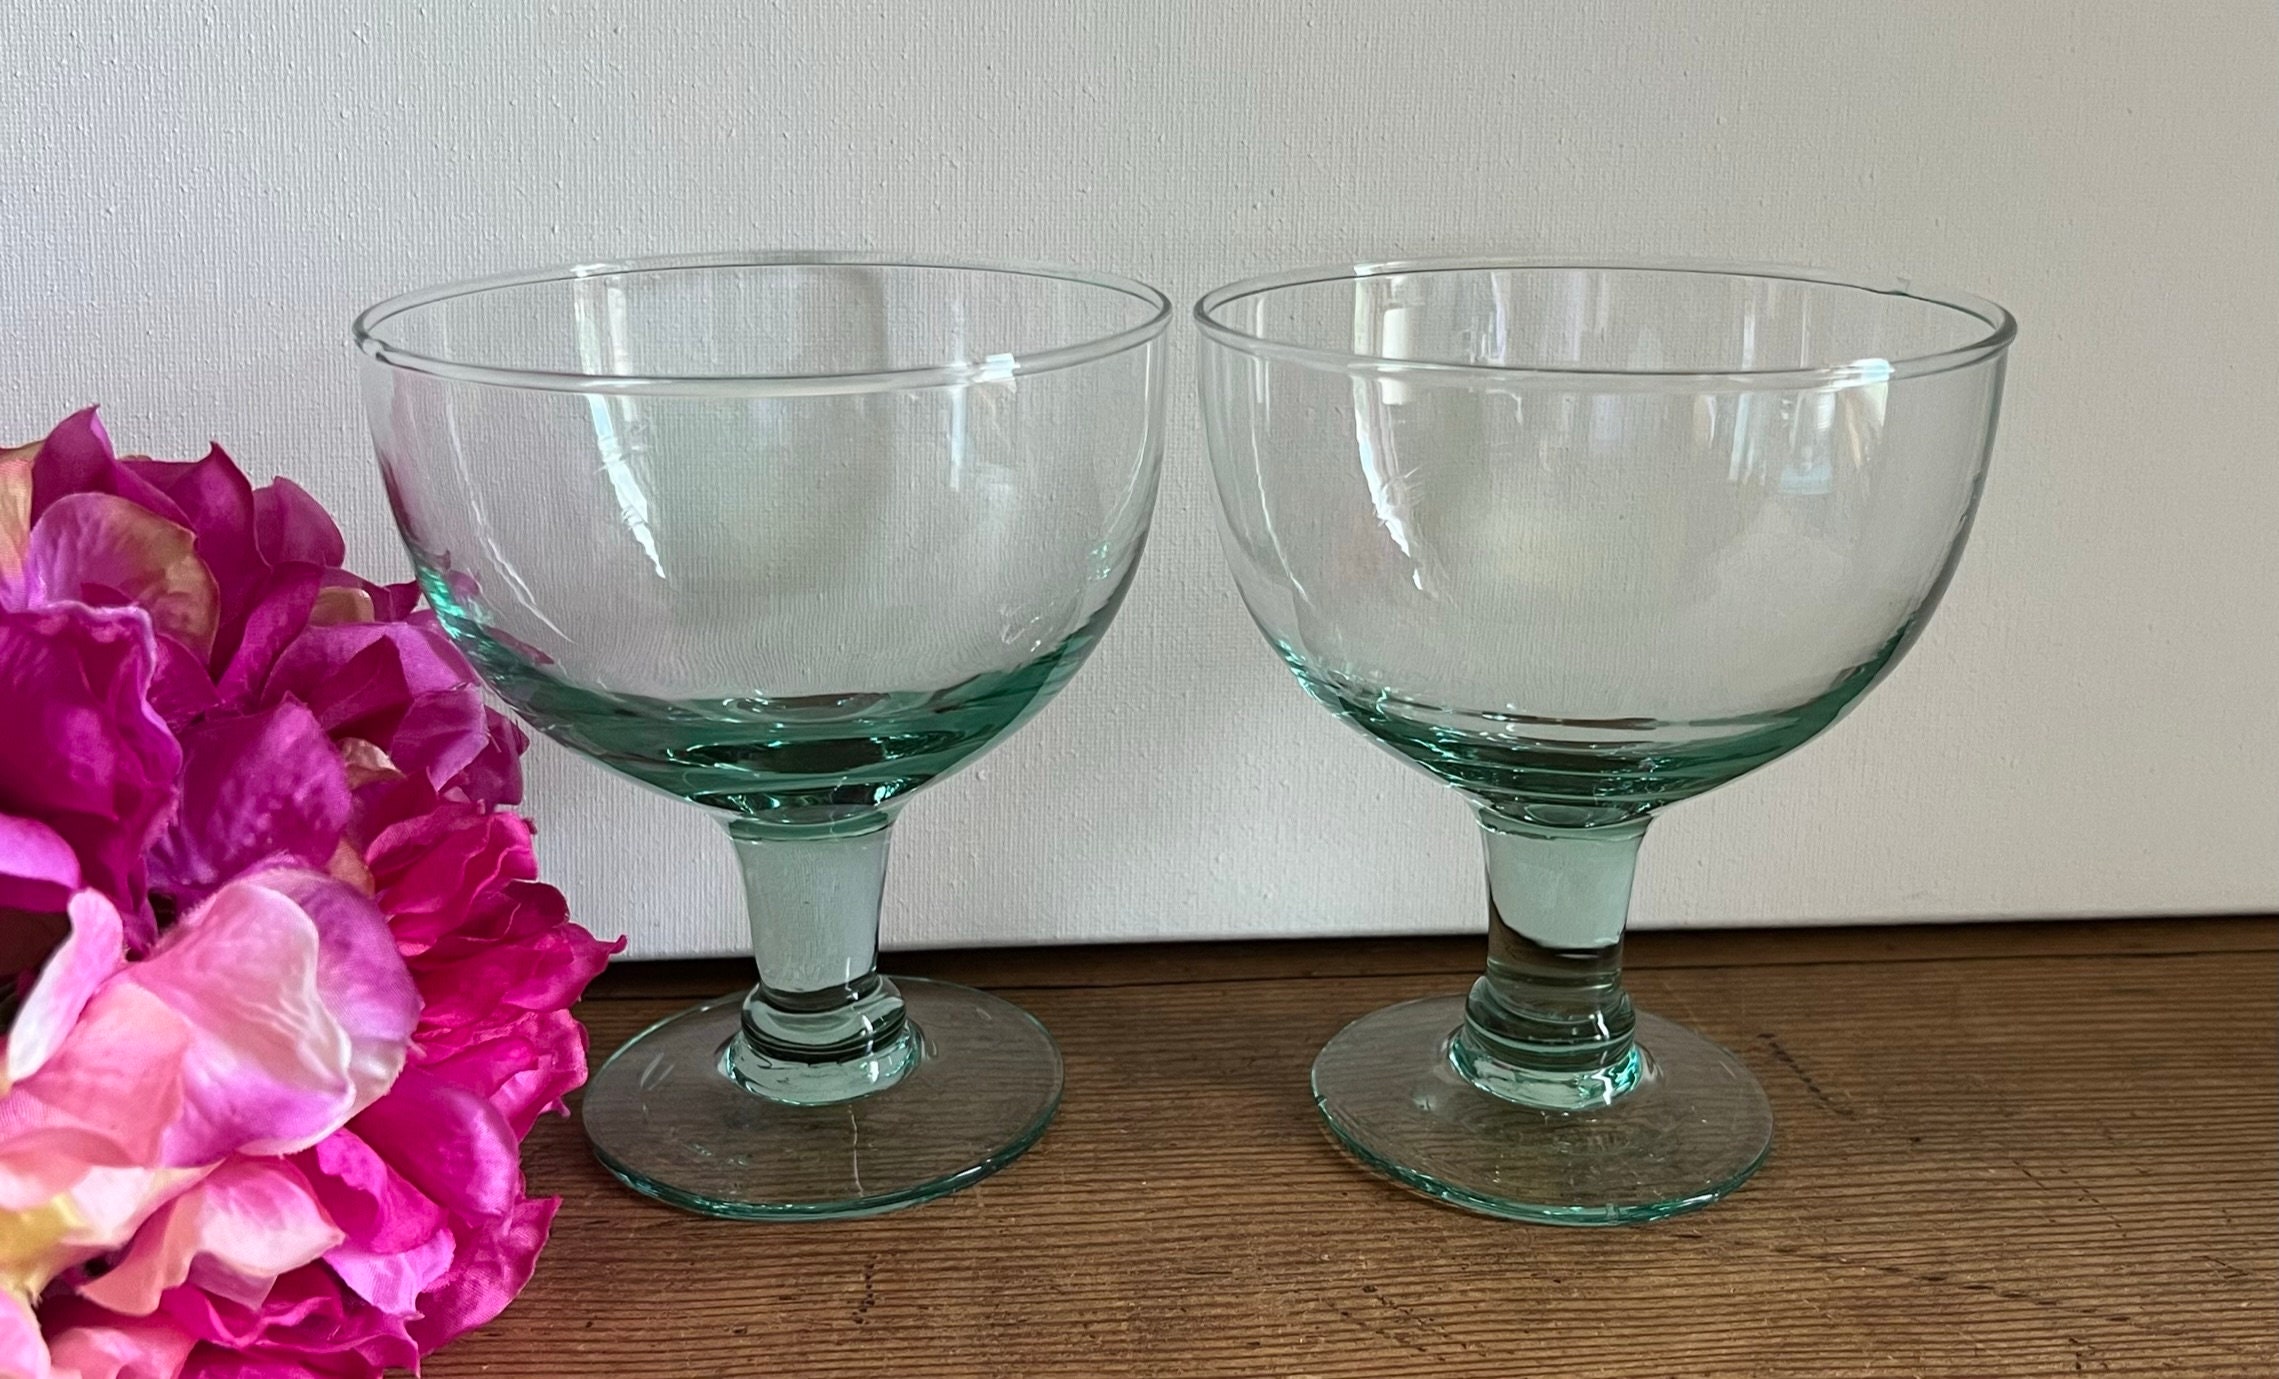 Stemless Martini Glass - Set of 2 - CAPERS Home